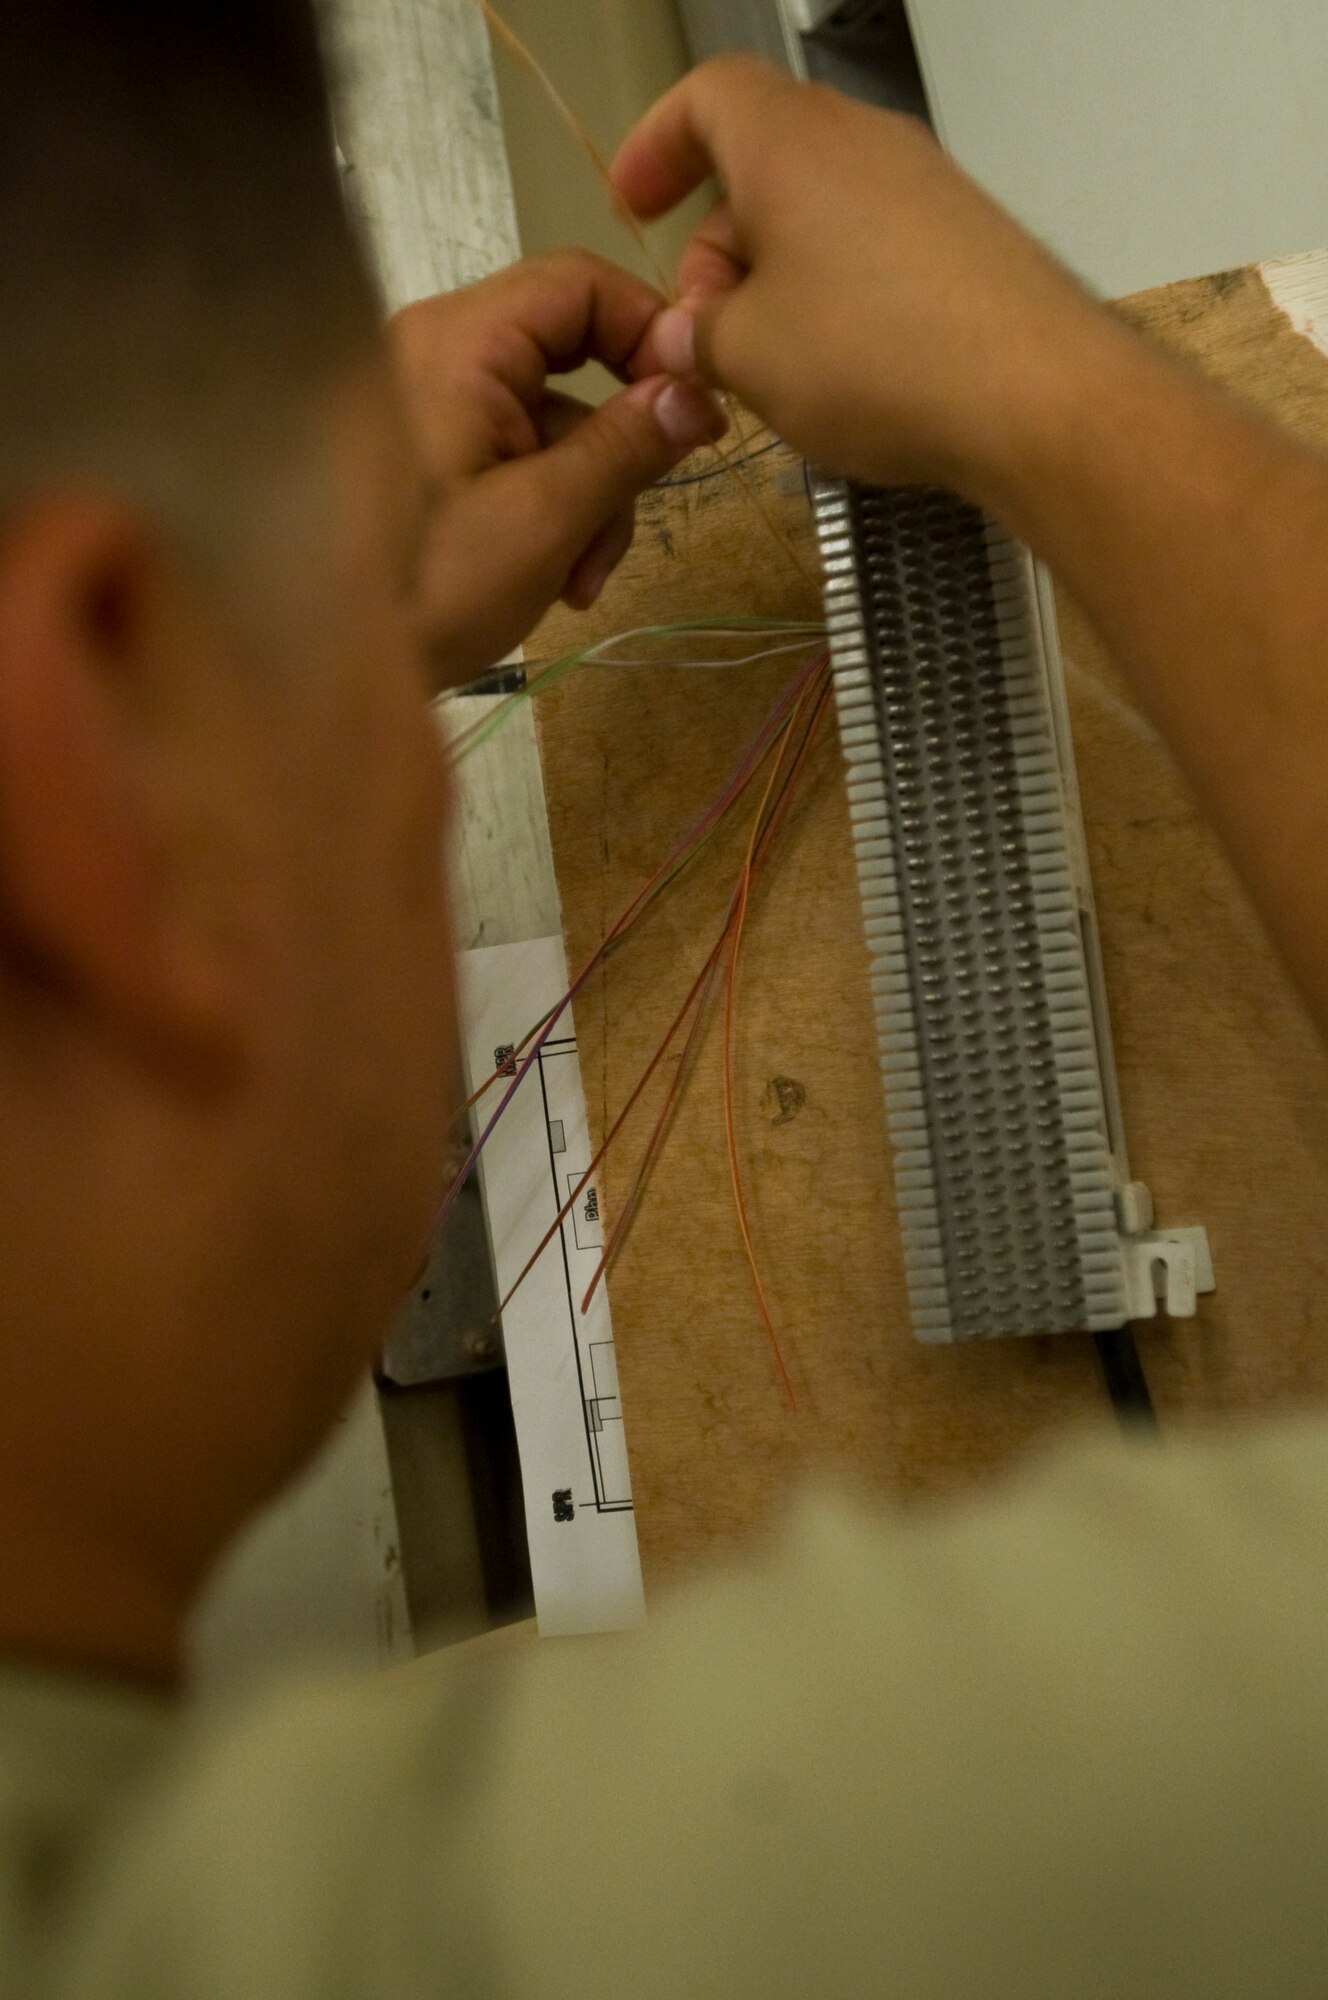 ALI BASE, Iraq -- Staff Sgt. Javiel Ladines, 407th Expeditionary Communications Squadron network technician, separates wires that will be inserted into a cross connector enabling a phone connection Aug. 8, 2008. The 407th ECS "Wire Dogs" installed fiber optics inside a new building that the Navy will use. By installing the fiber optics, they are giving telephone and Internet connections to the Navy which enables them to continue their mission during transitions. Sergeant Ladines is deployed from Tinker Air Force Base, Okla. (U.S. Air Force photo/Airman 1st Class Christopher Griffin)